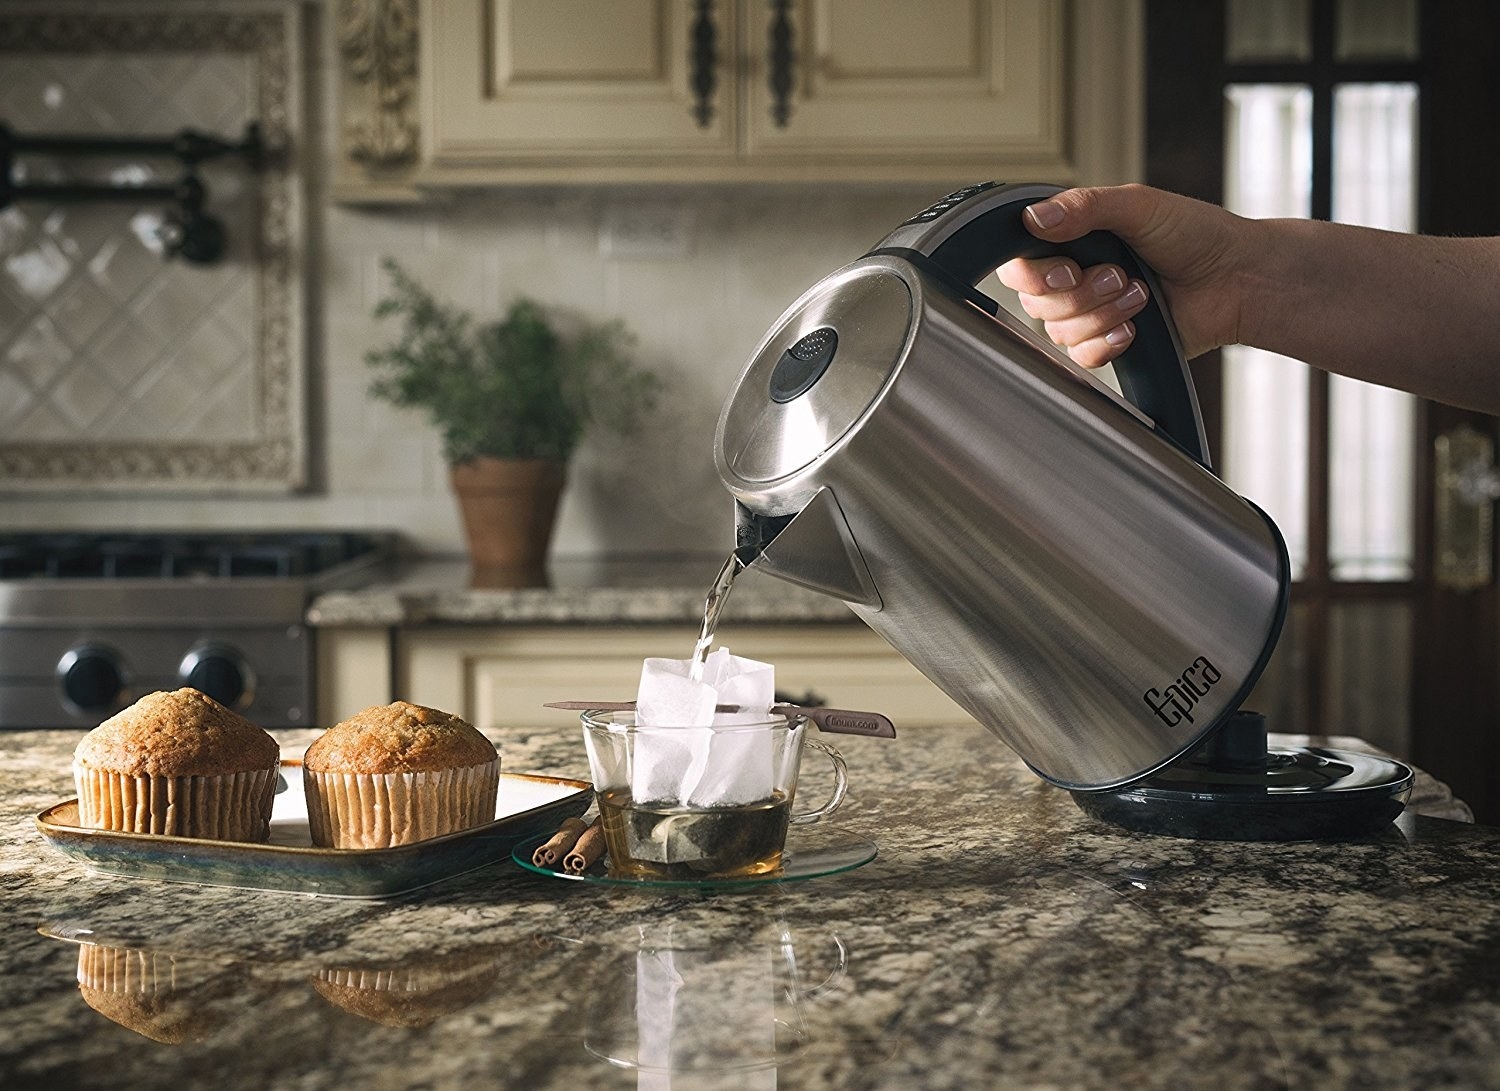 13 Kitchen gadgets you never knew you needed – SheKnows